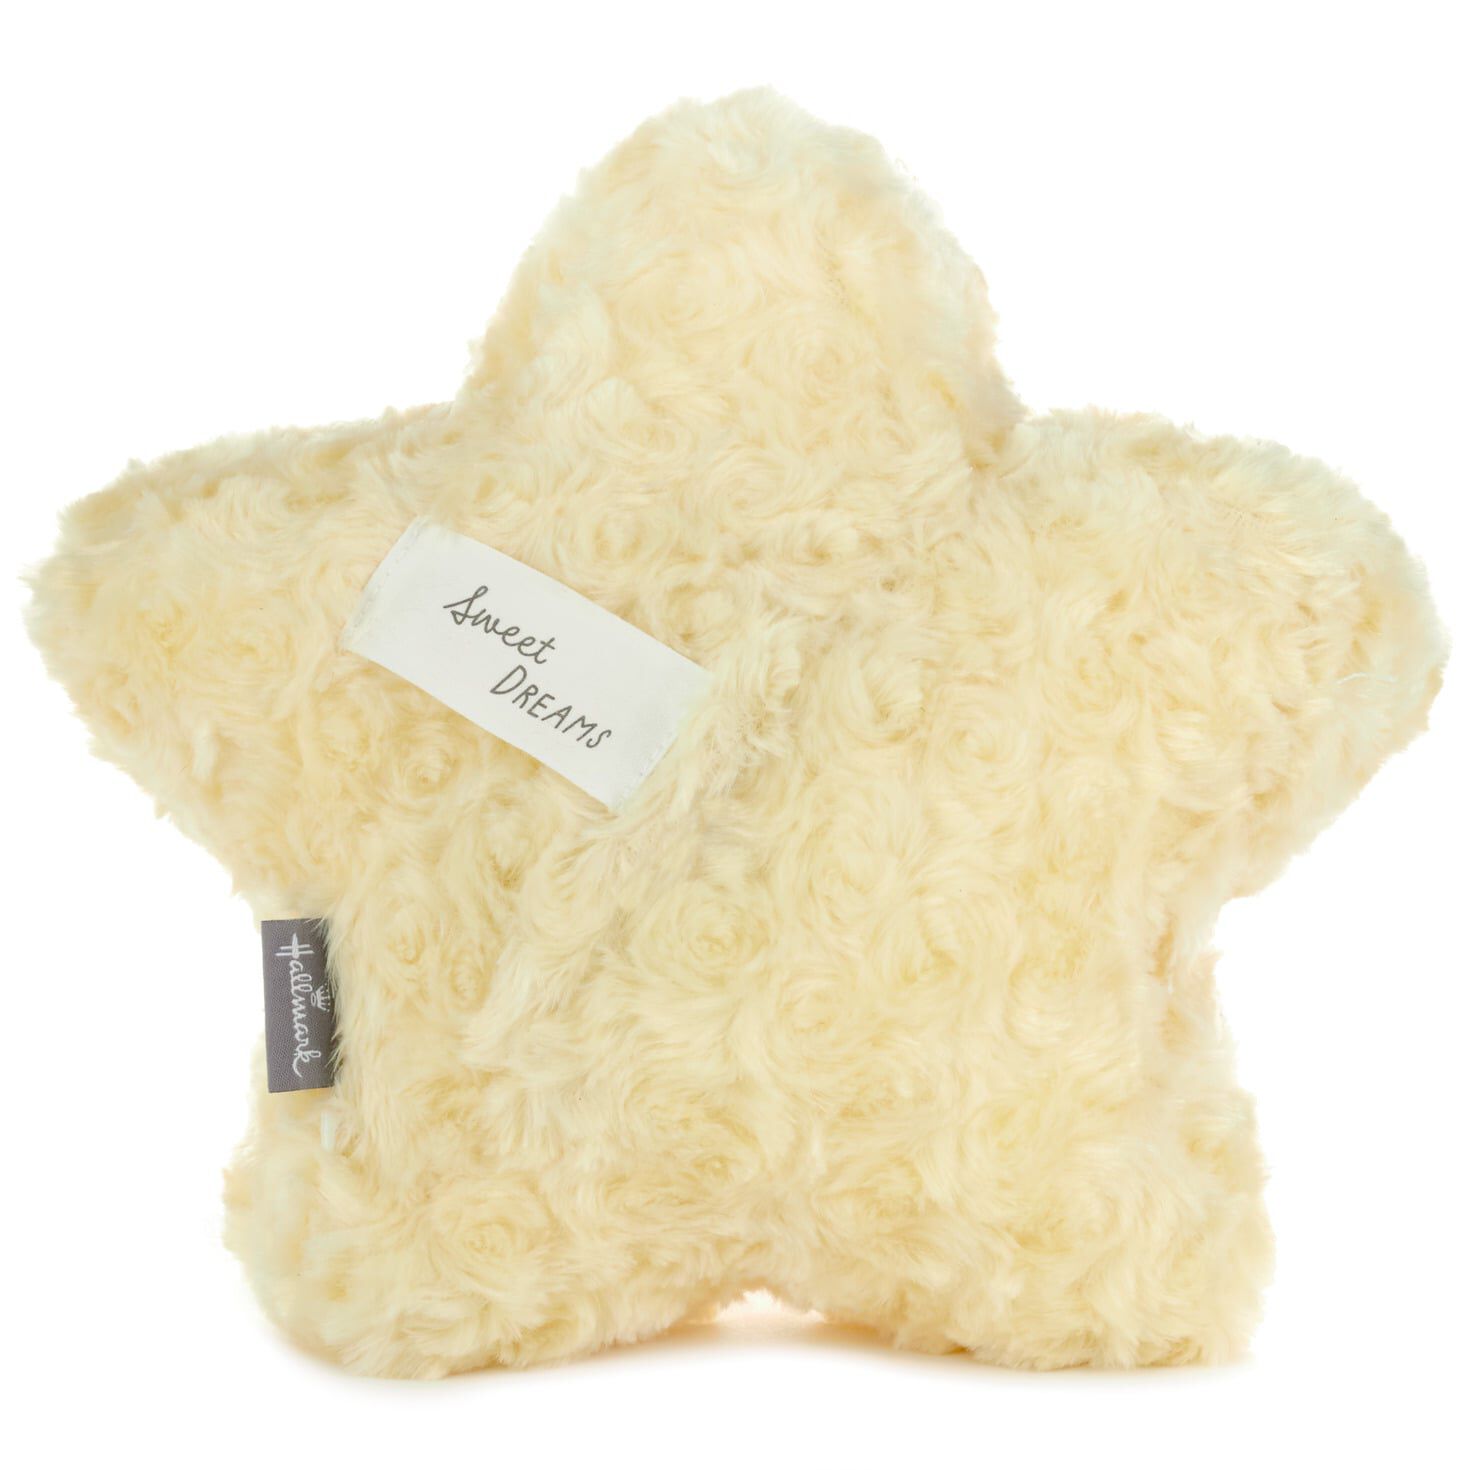 stuffed animal with recordable message